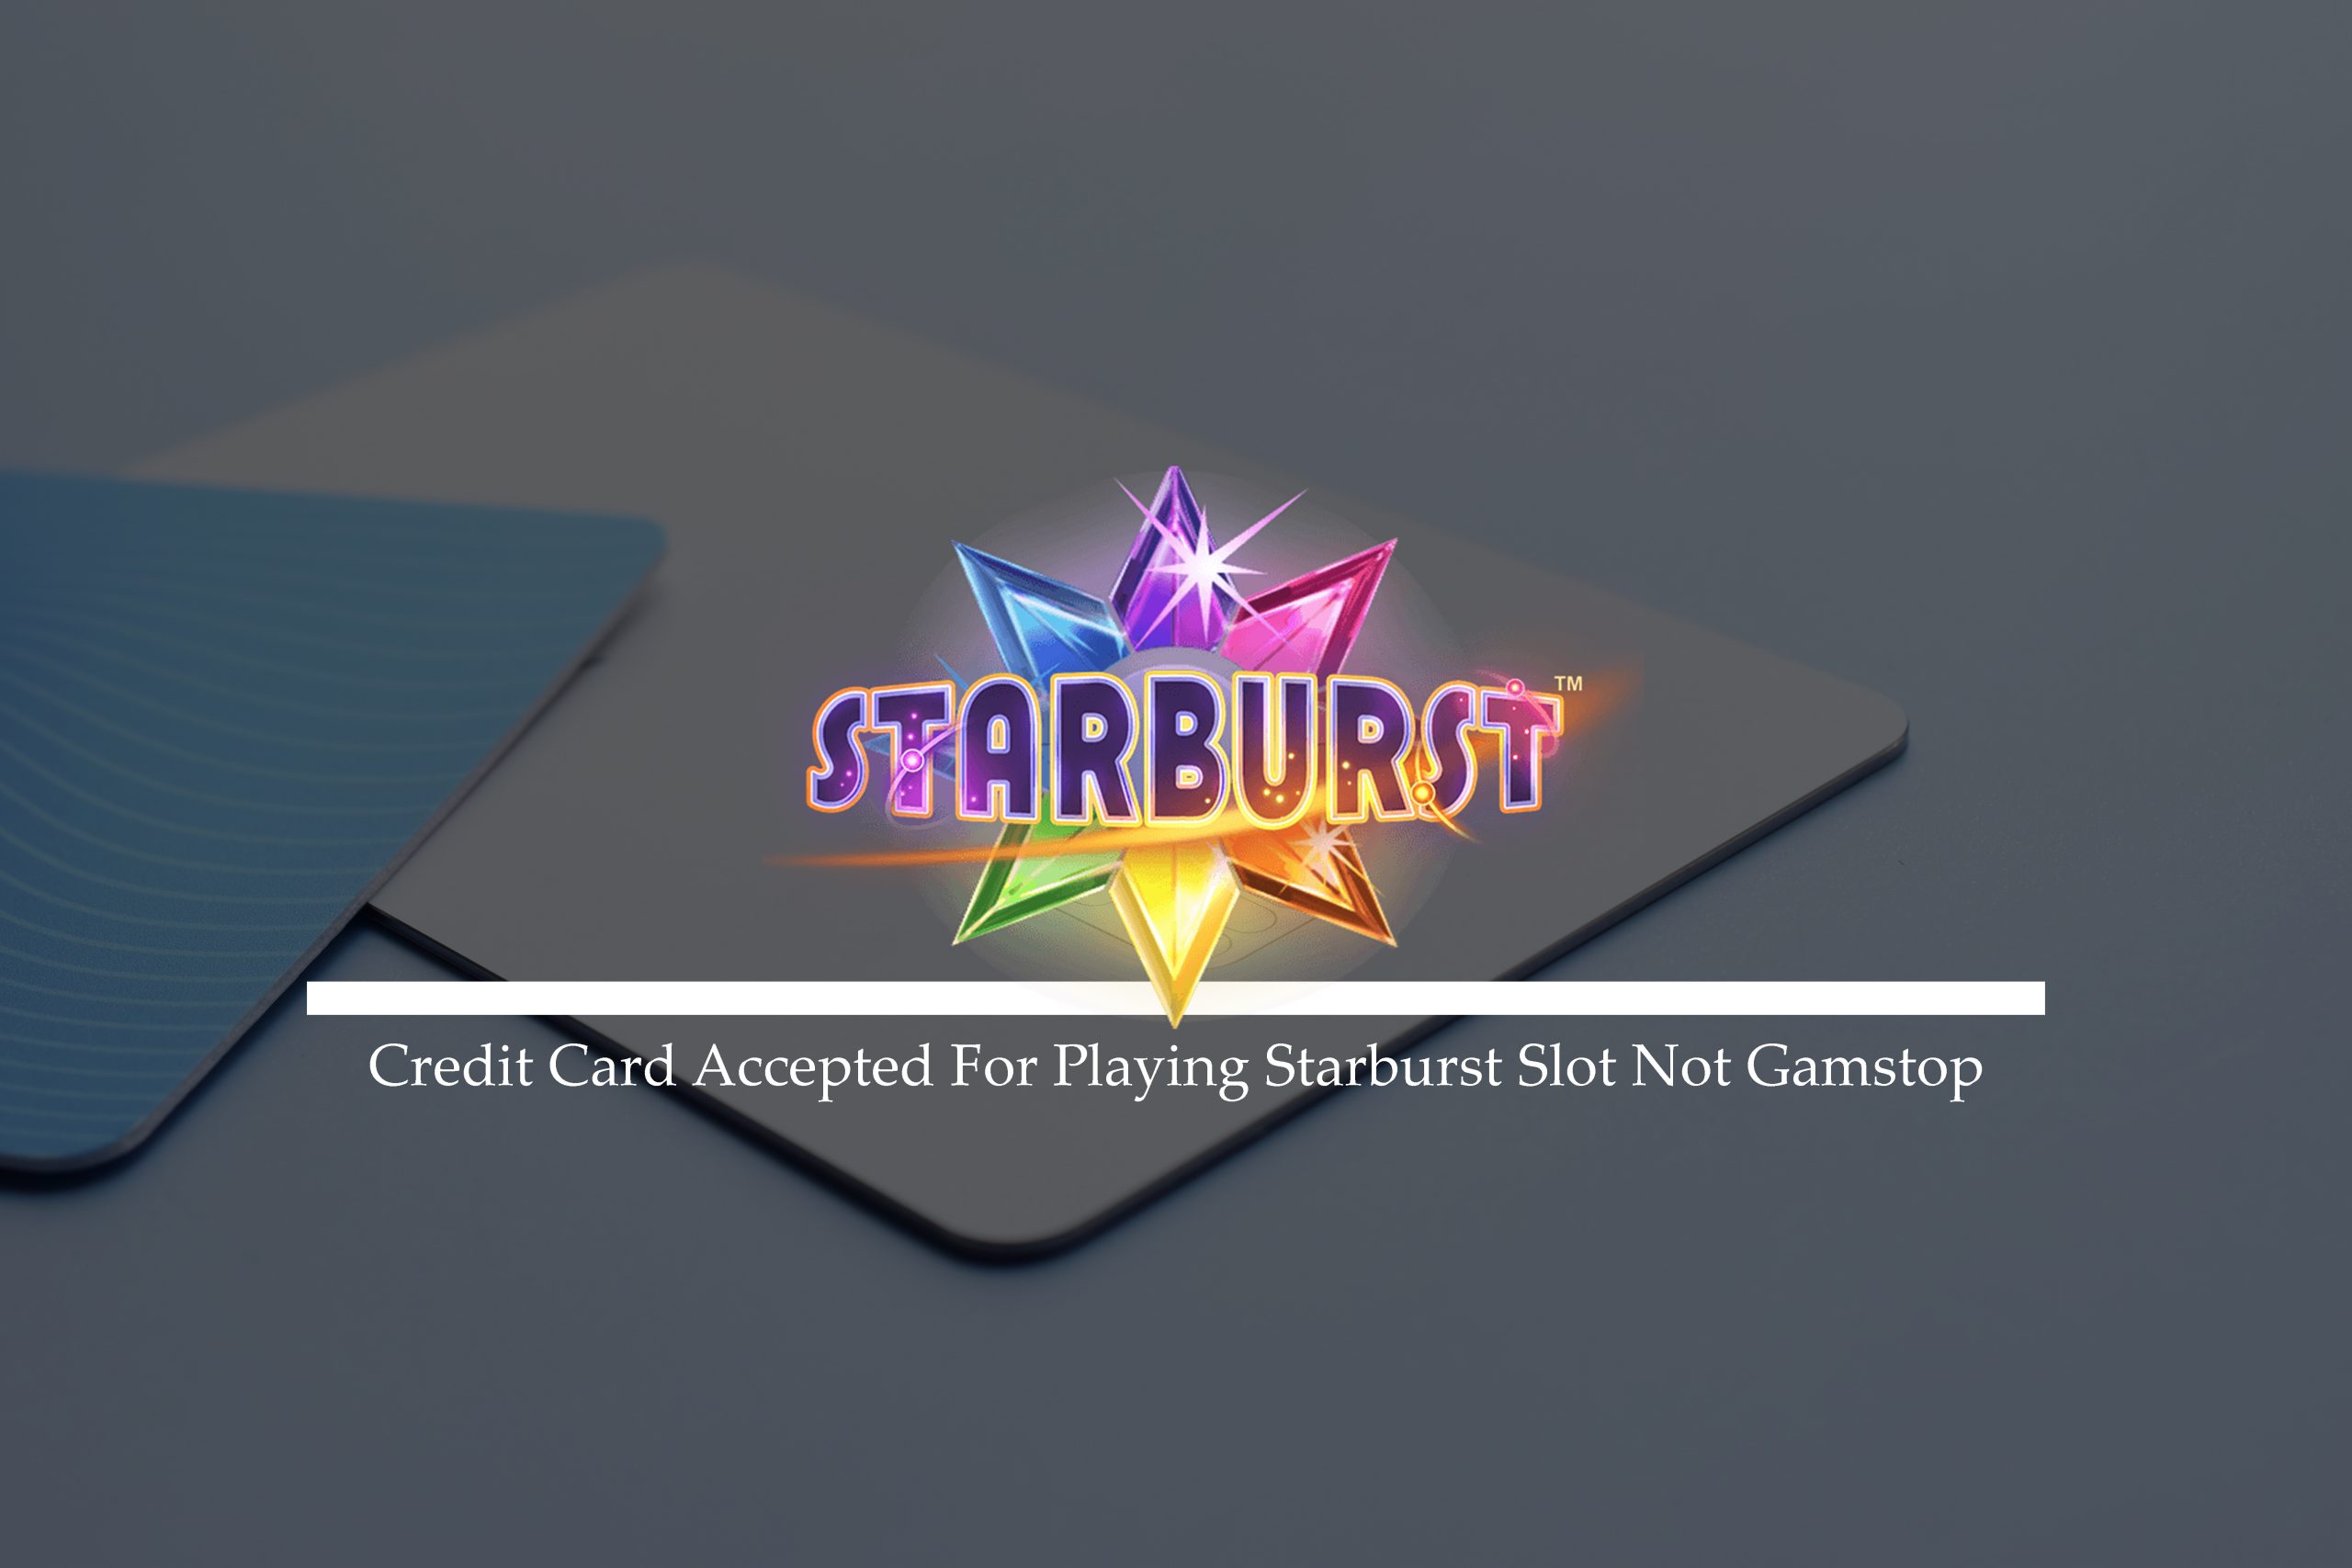 Credit Card Accepted For Playing Starburst Slot Not Gamstop